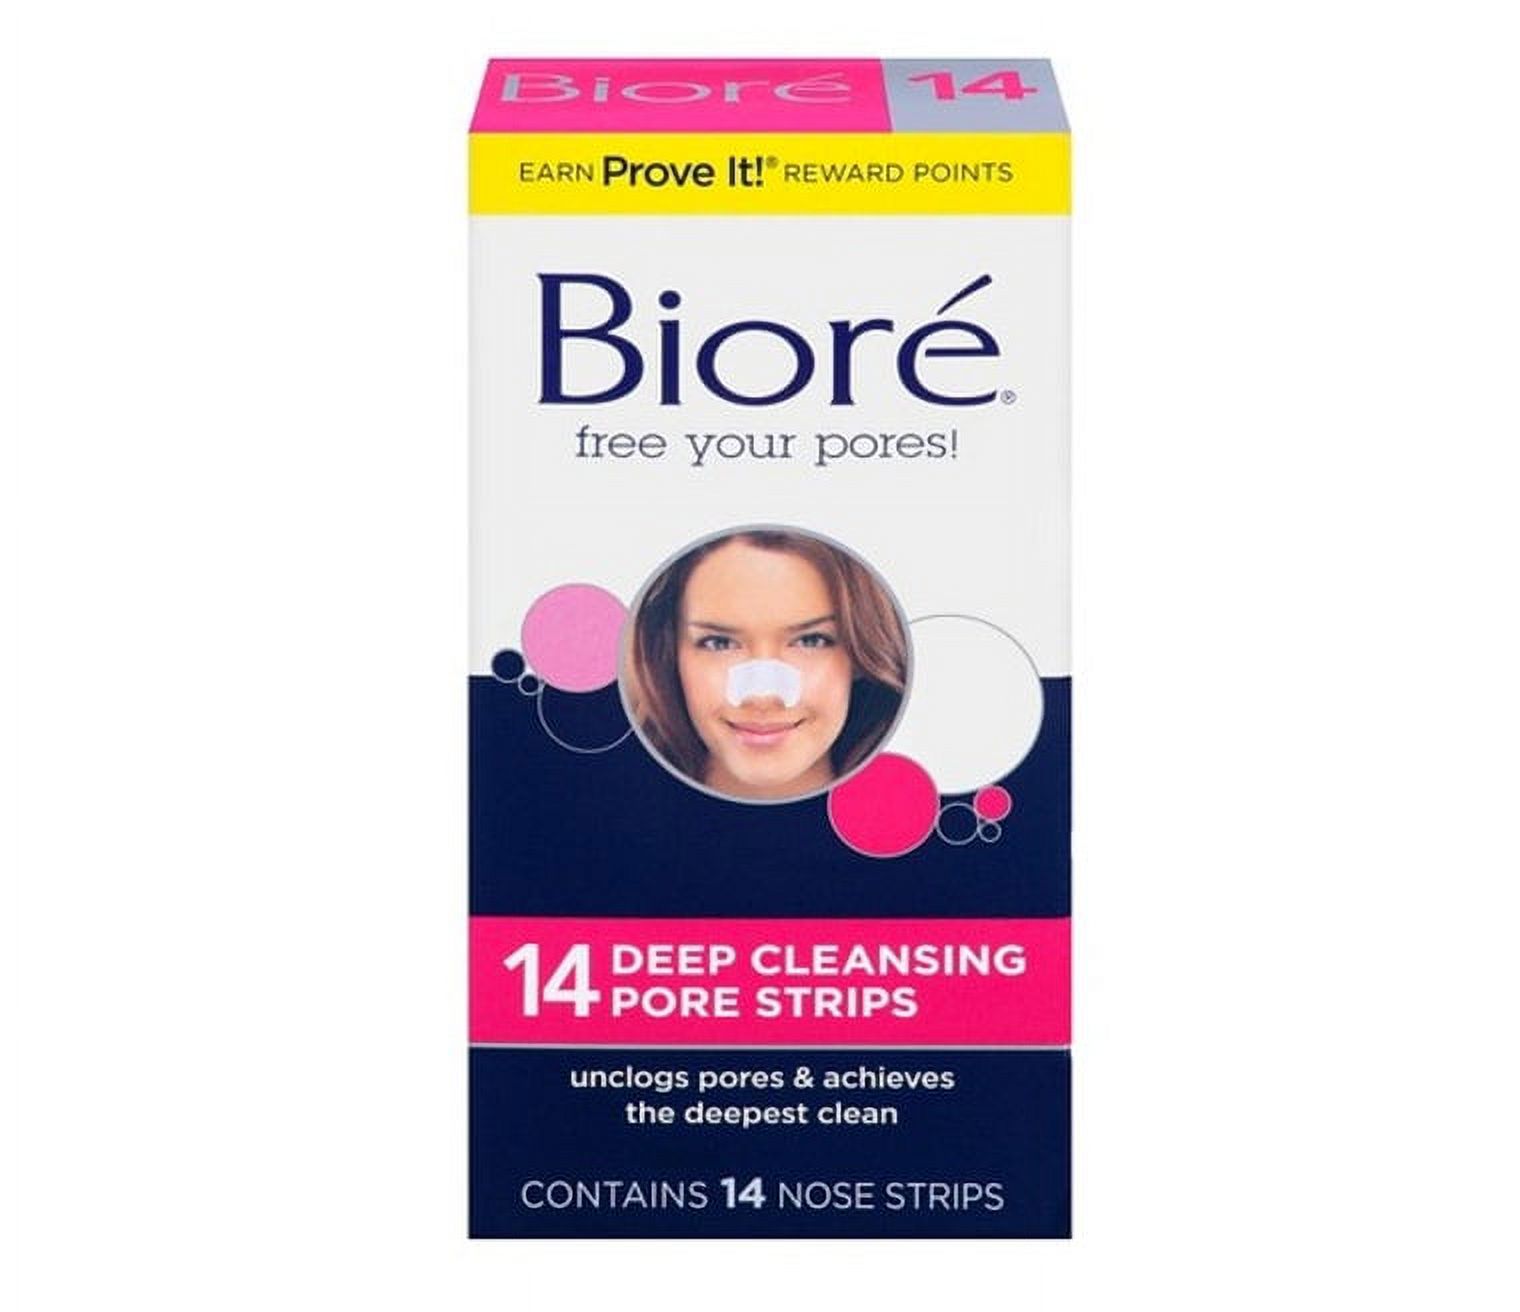 Biore Deep Cleansing Pore Strips Nose, 14 Each (Pack of 2) - image 2 of 3